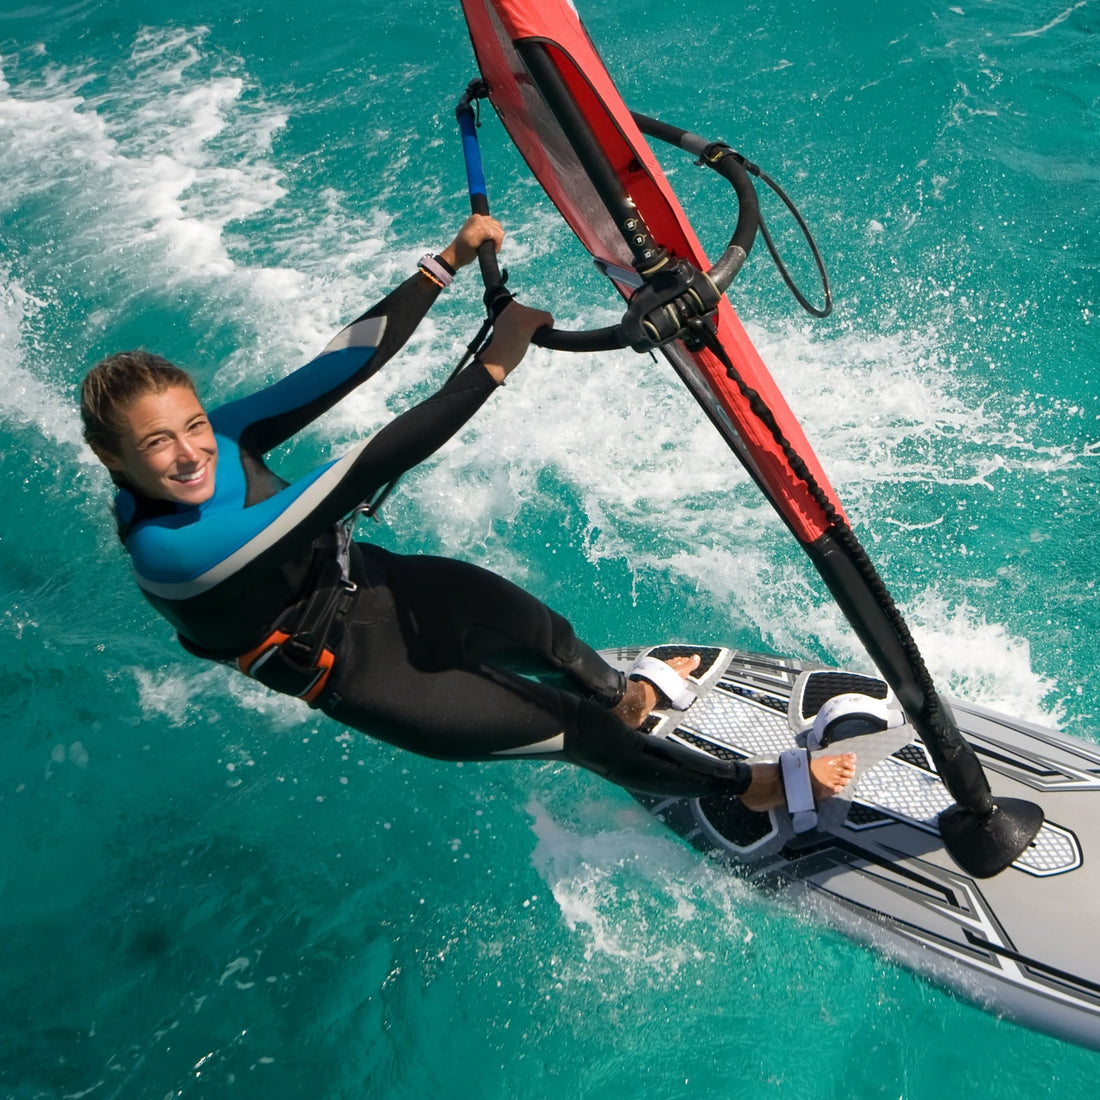 Windsurf Maui Private Lesson starting at $9.99